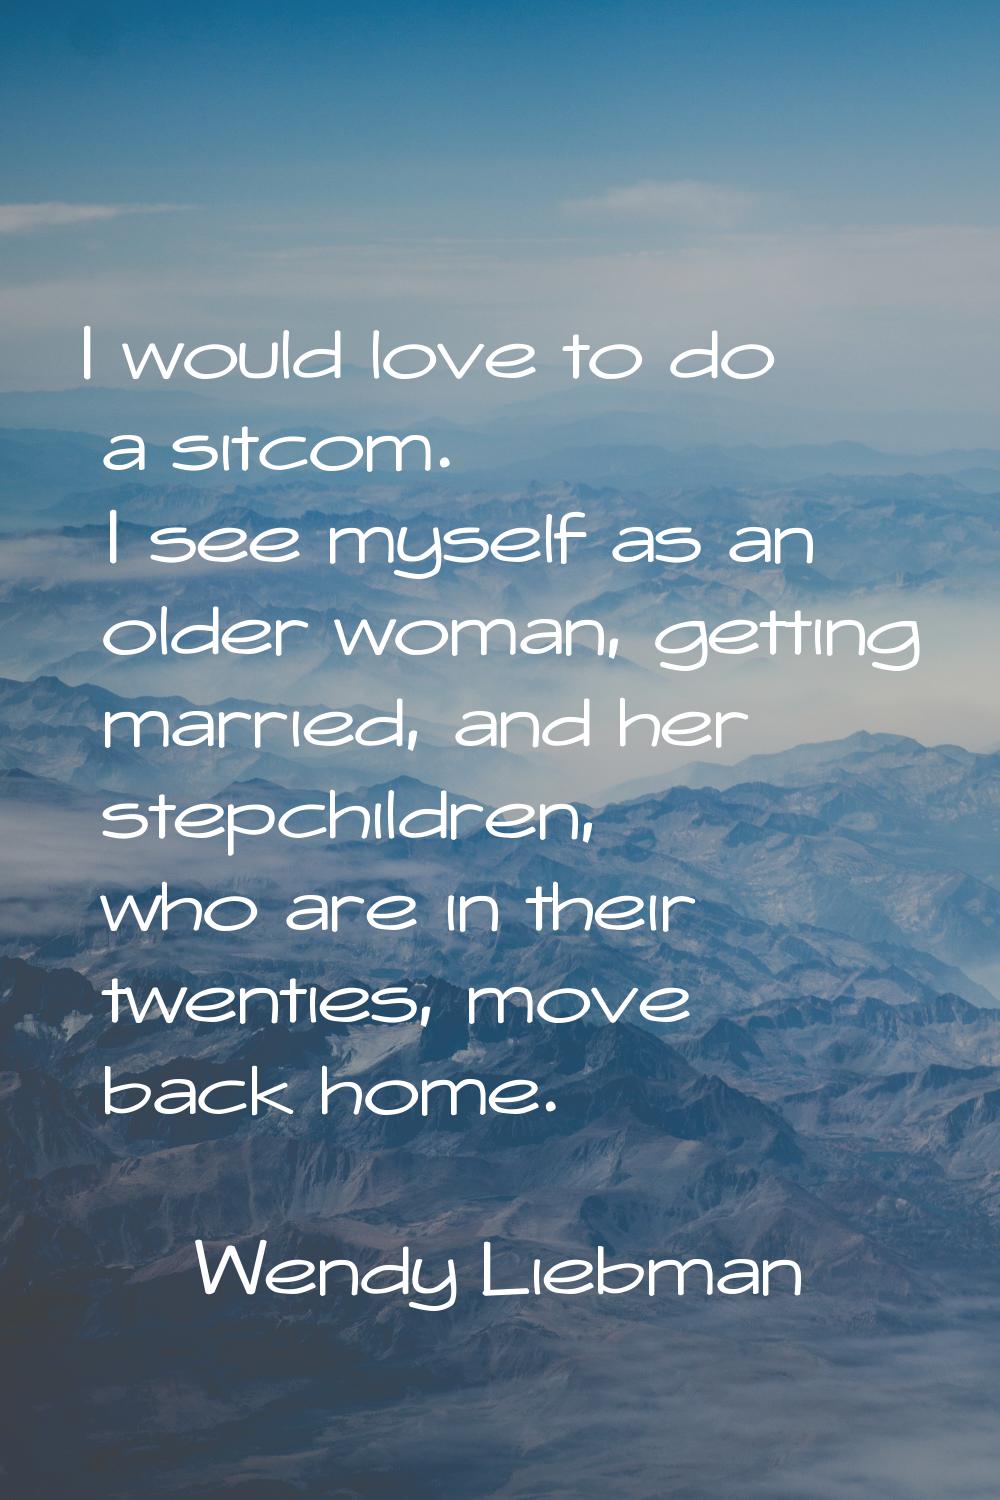 I would love to do a sitcom. I see myself as an older woman, getting married, and her stepchildren,